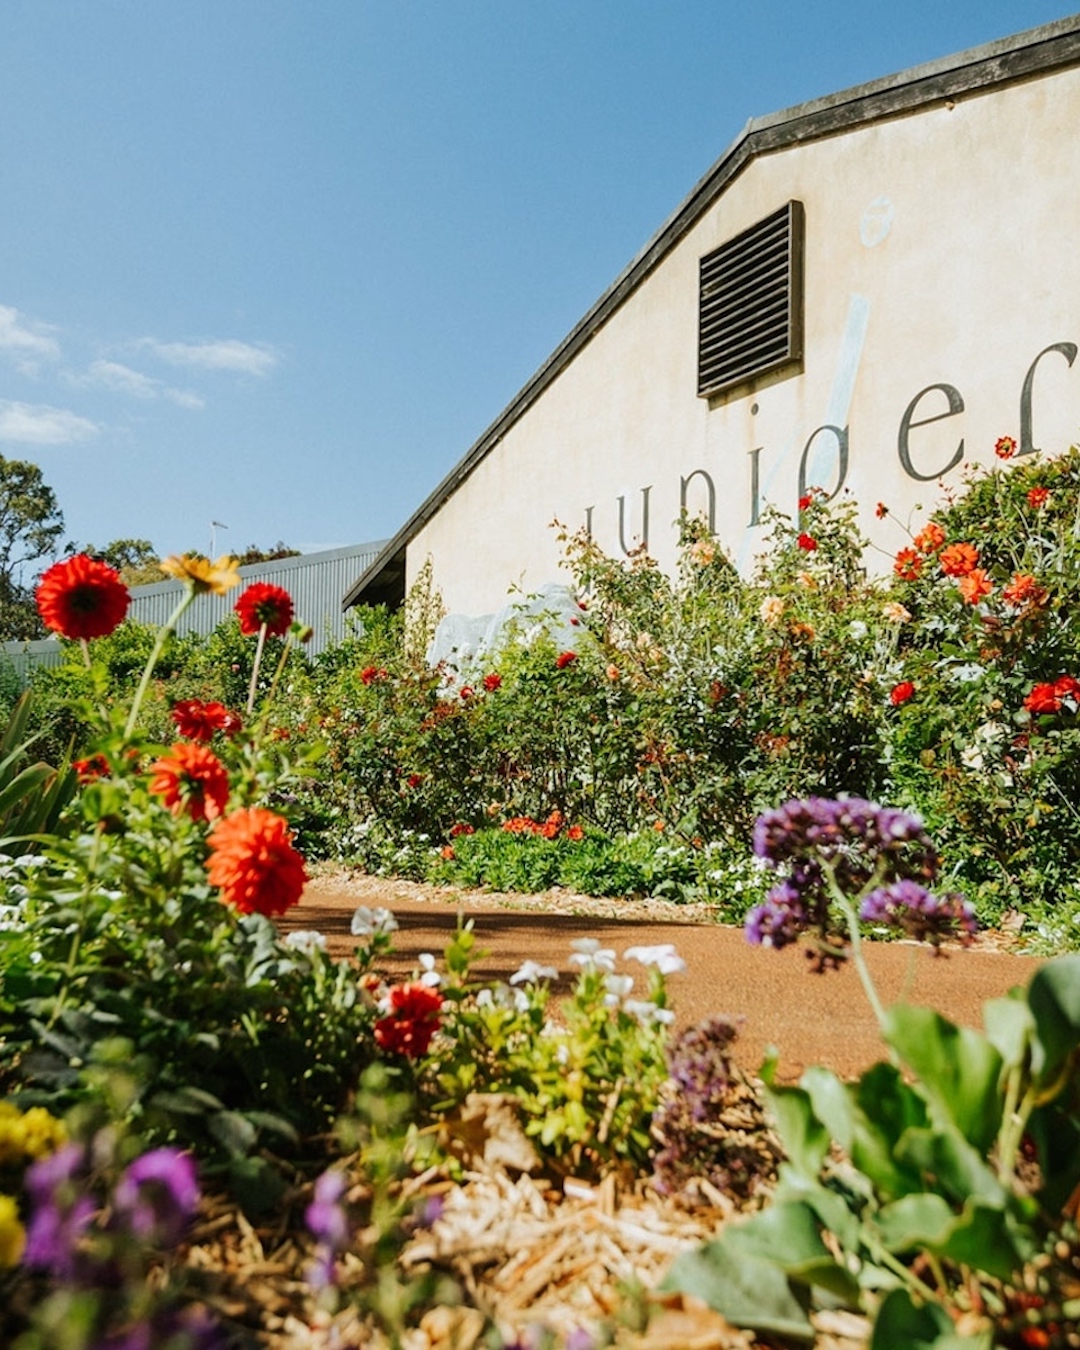 A path leading towards Juniper's cellar door surrounded by flowers